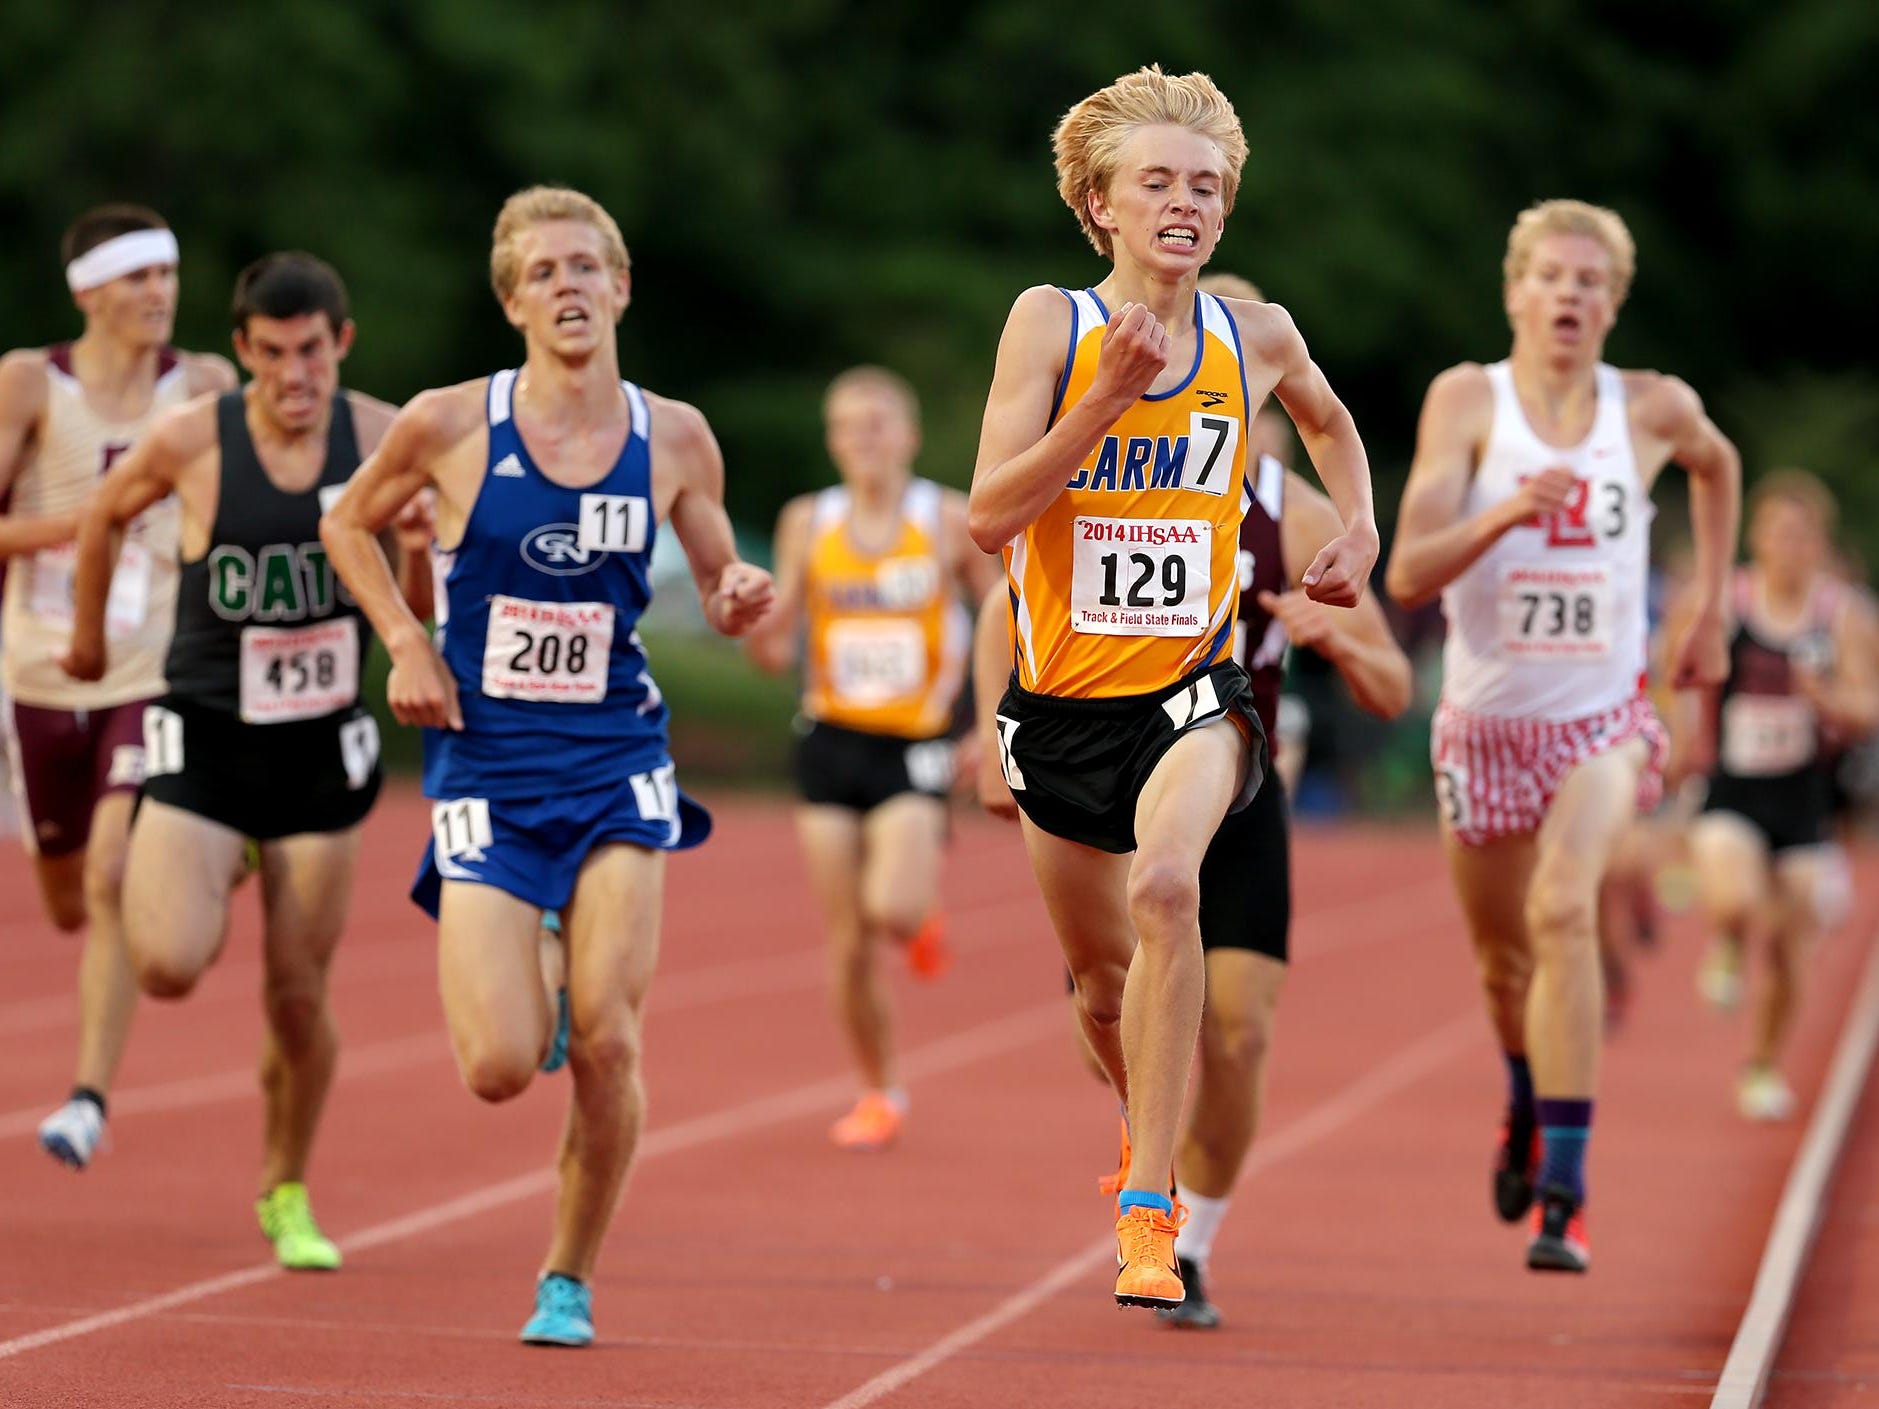 Carmel's Ben Veatch holds off the field to finish second in the 3200 meter run during the 111th annual Boys Track & Field State Finals, Saturday, June 7, 2014, at Indiana University's Robert C. Haugh Track & Field Complex.